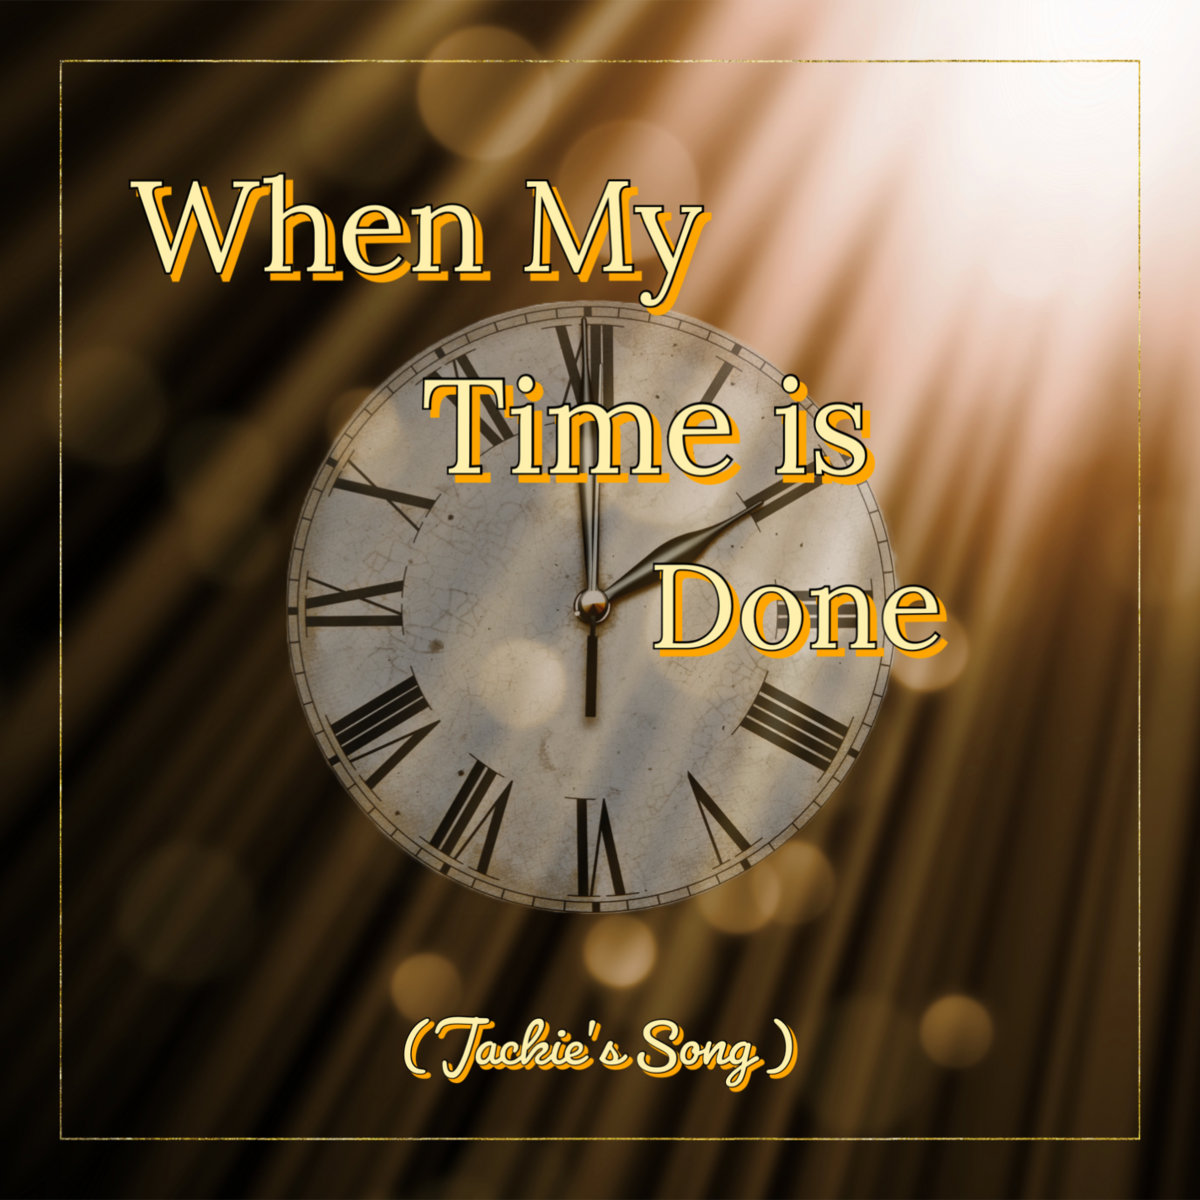 When My Time is Done